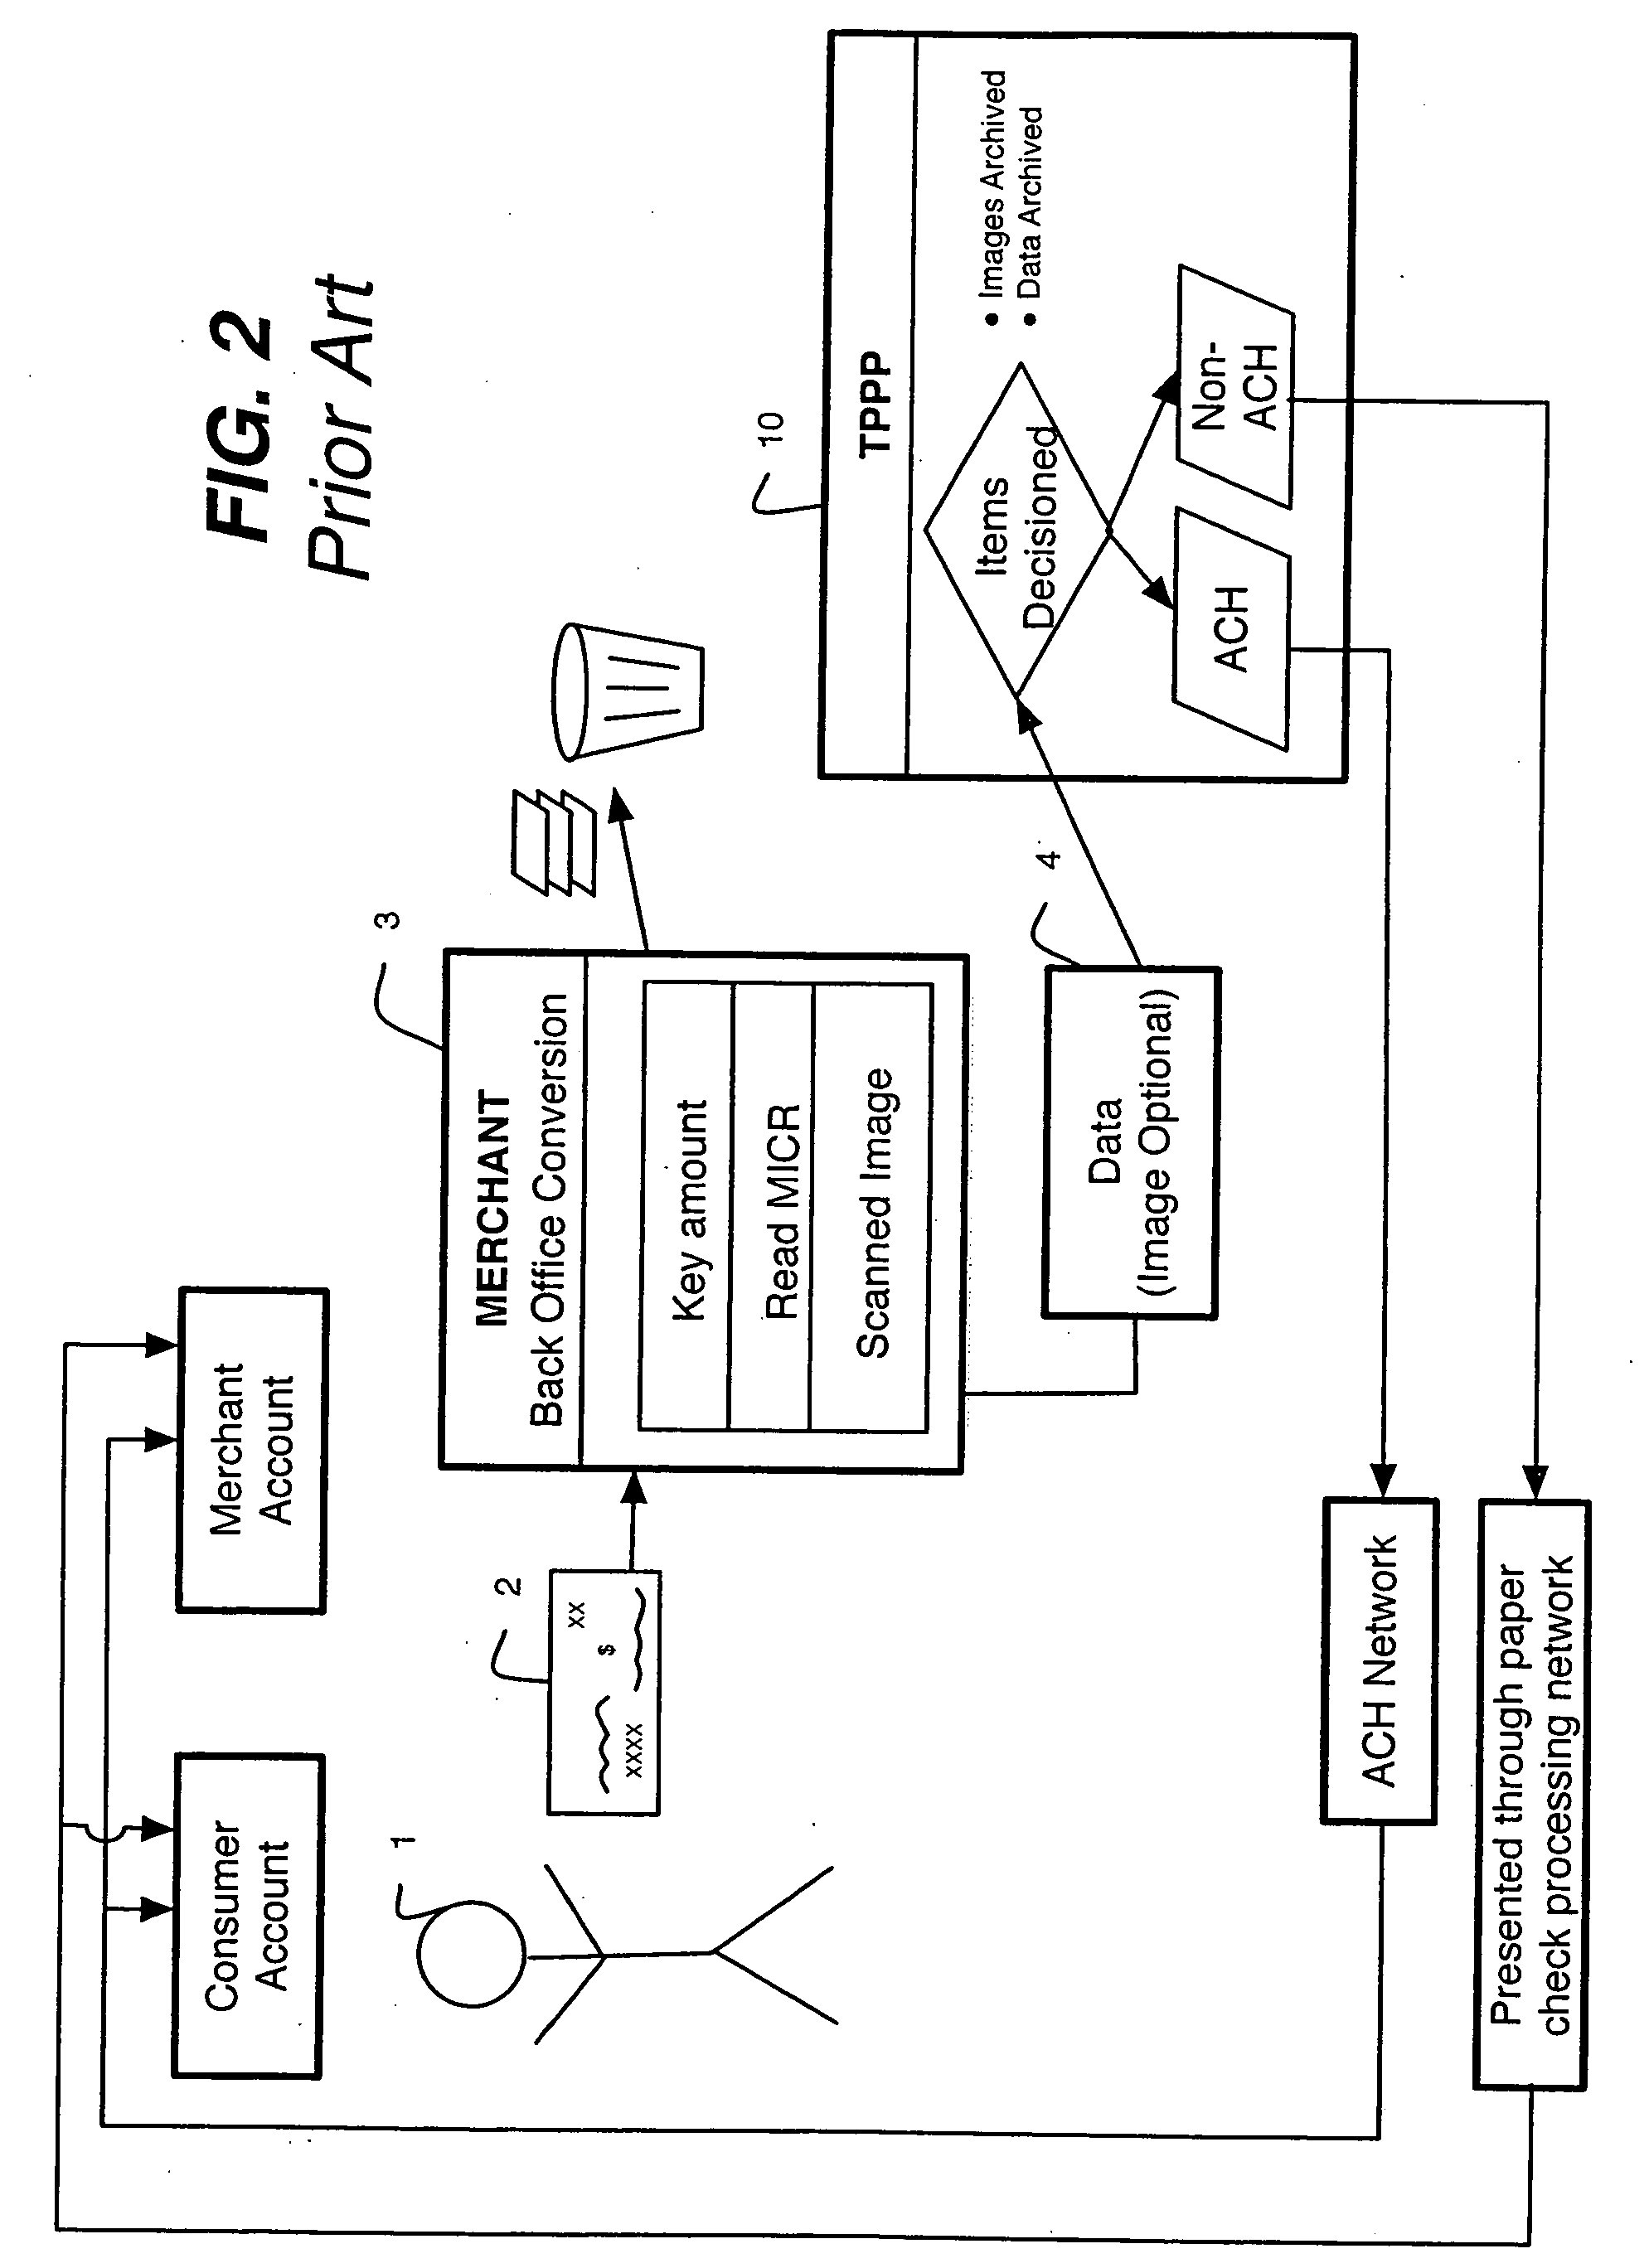 Control features in a system and method for processing checks and check transactions